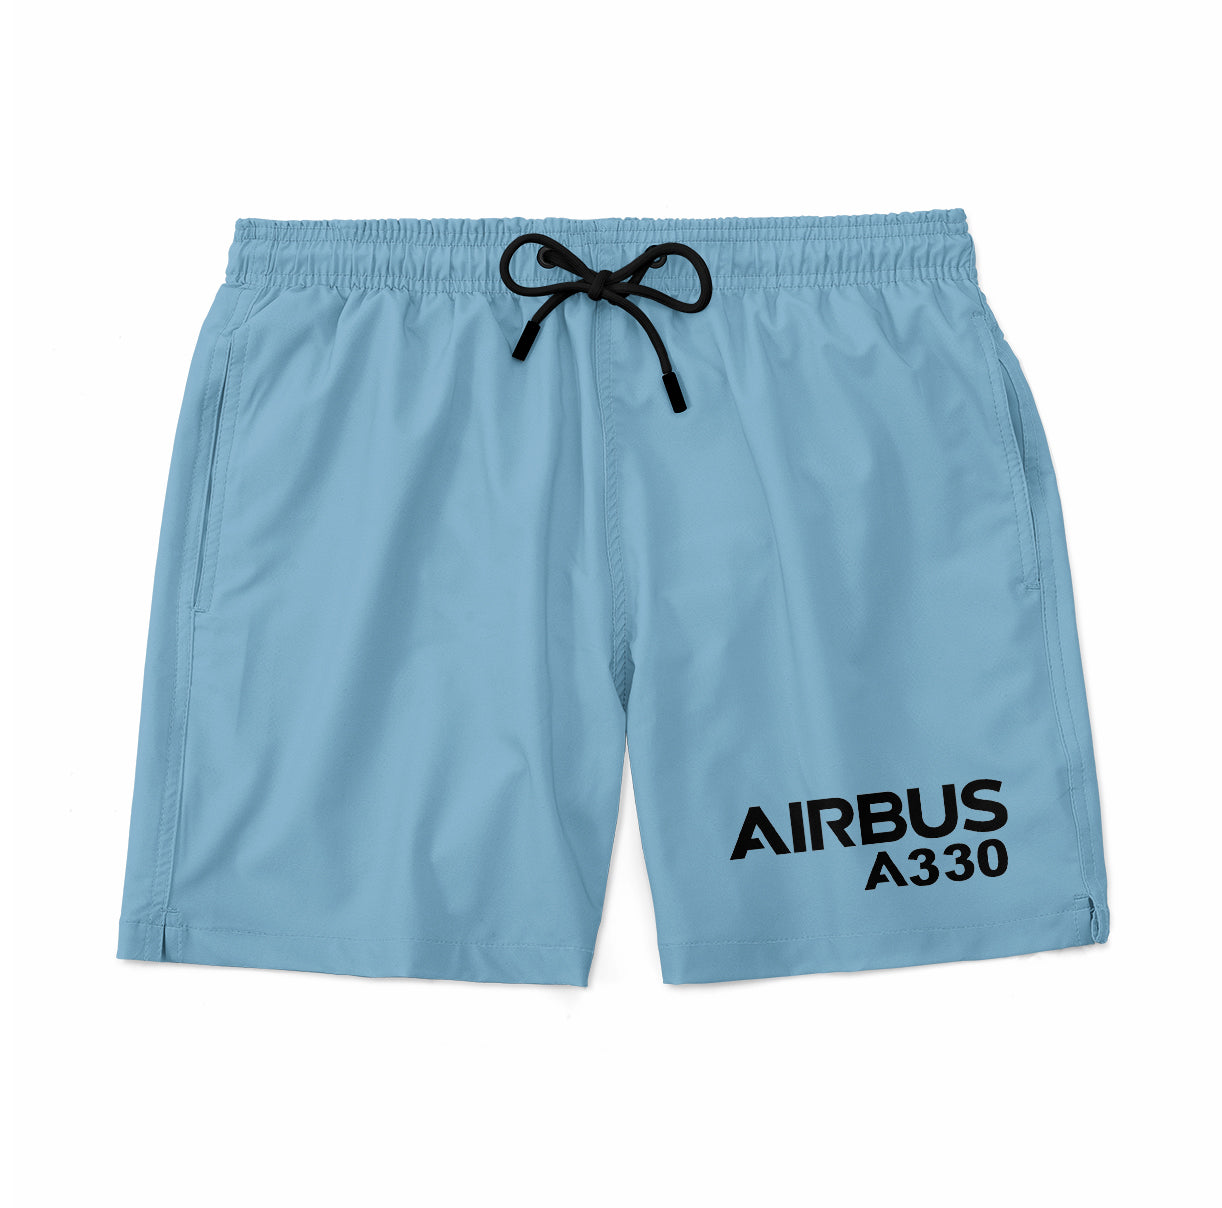 Airbus A330 & Text Designed Swim Trunks & Shorts